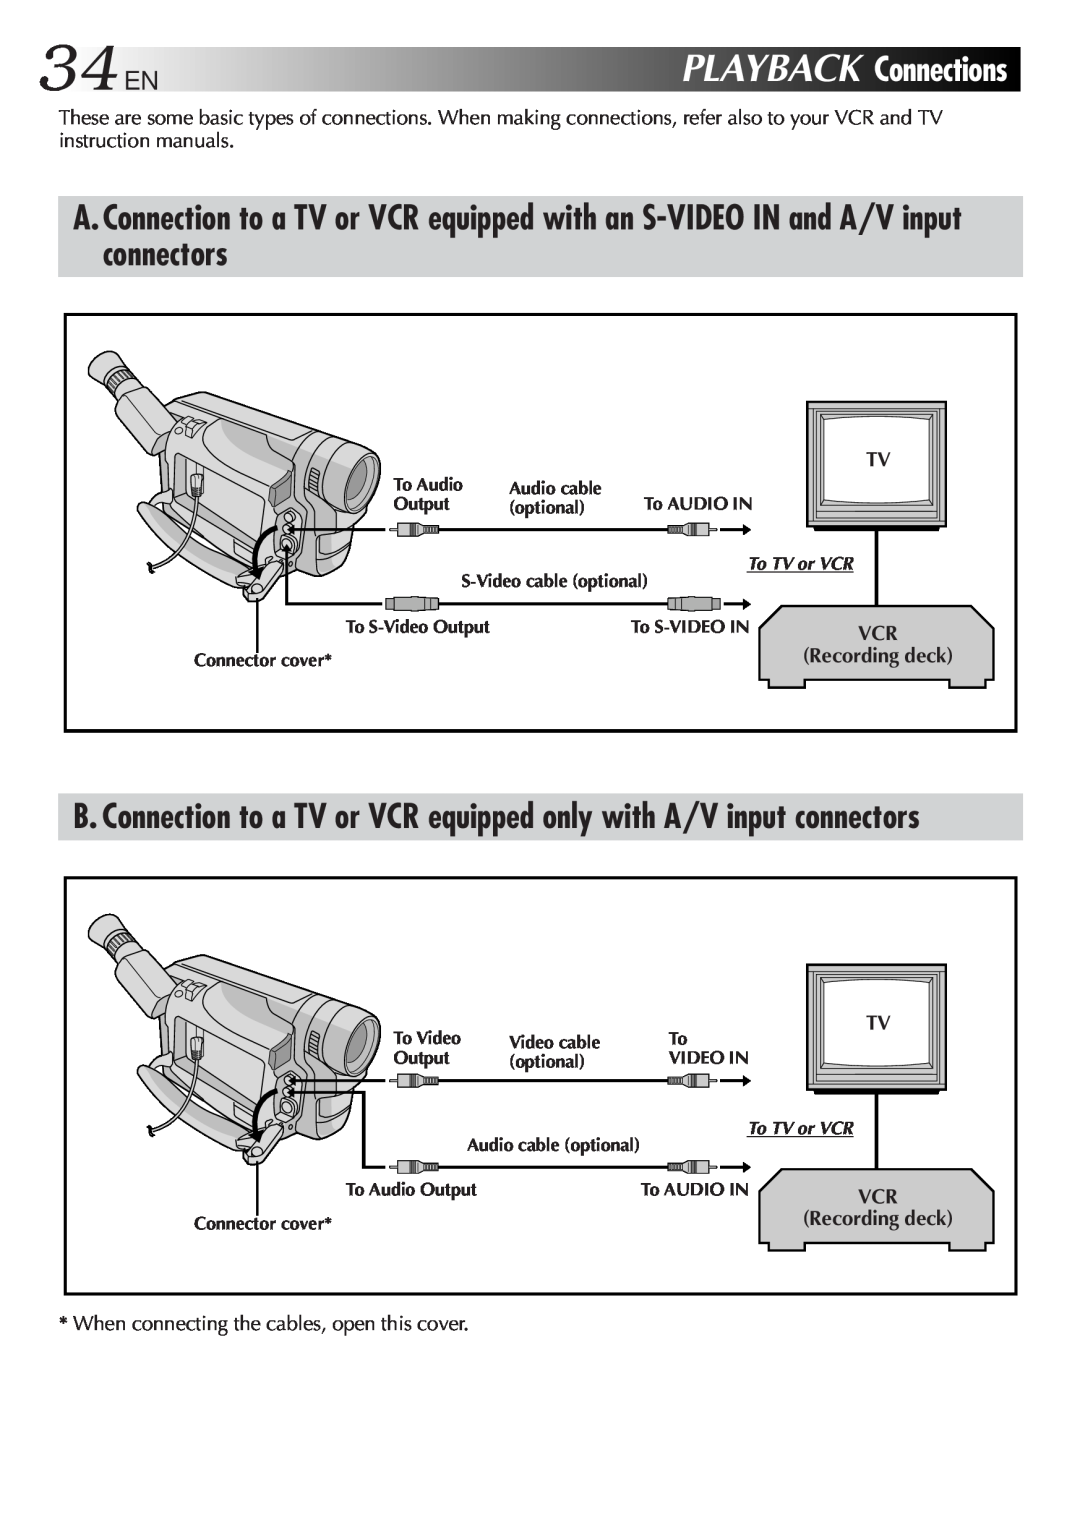 JVC GR-SXM321 34EN, PLAYBACKConnections, To Audio, Audio cable, Output, optional, To AUDIO IN, To TV or VCR, To S-VIDEO IN 